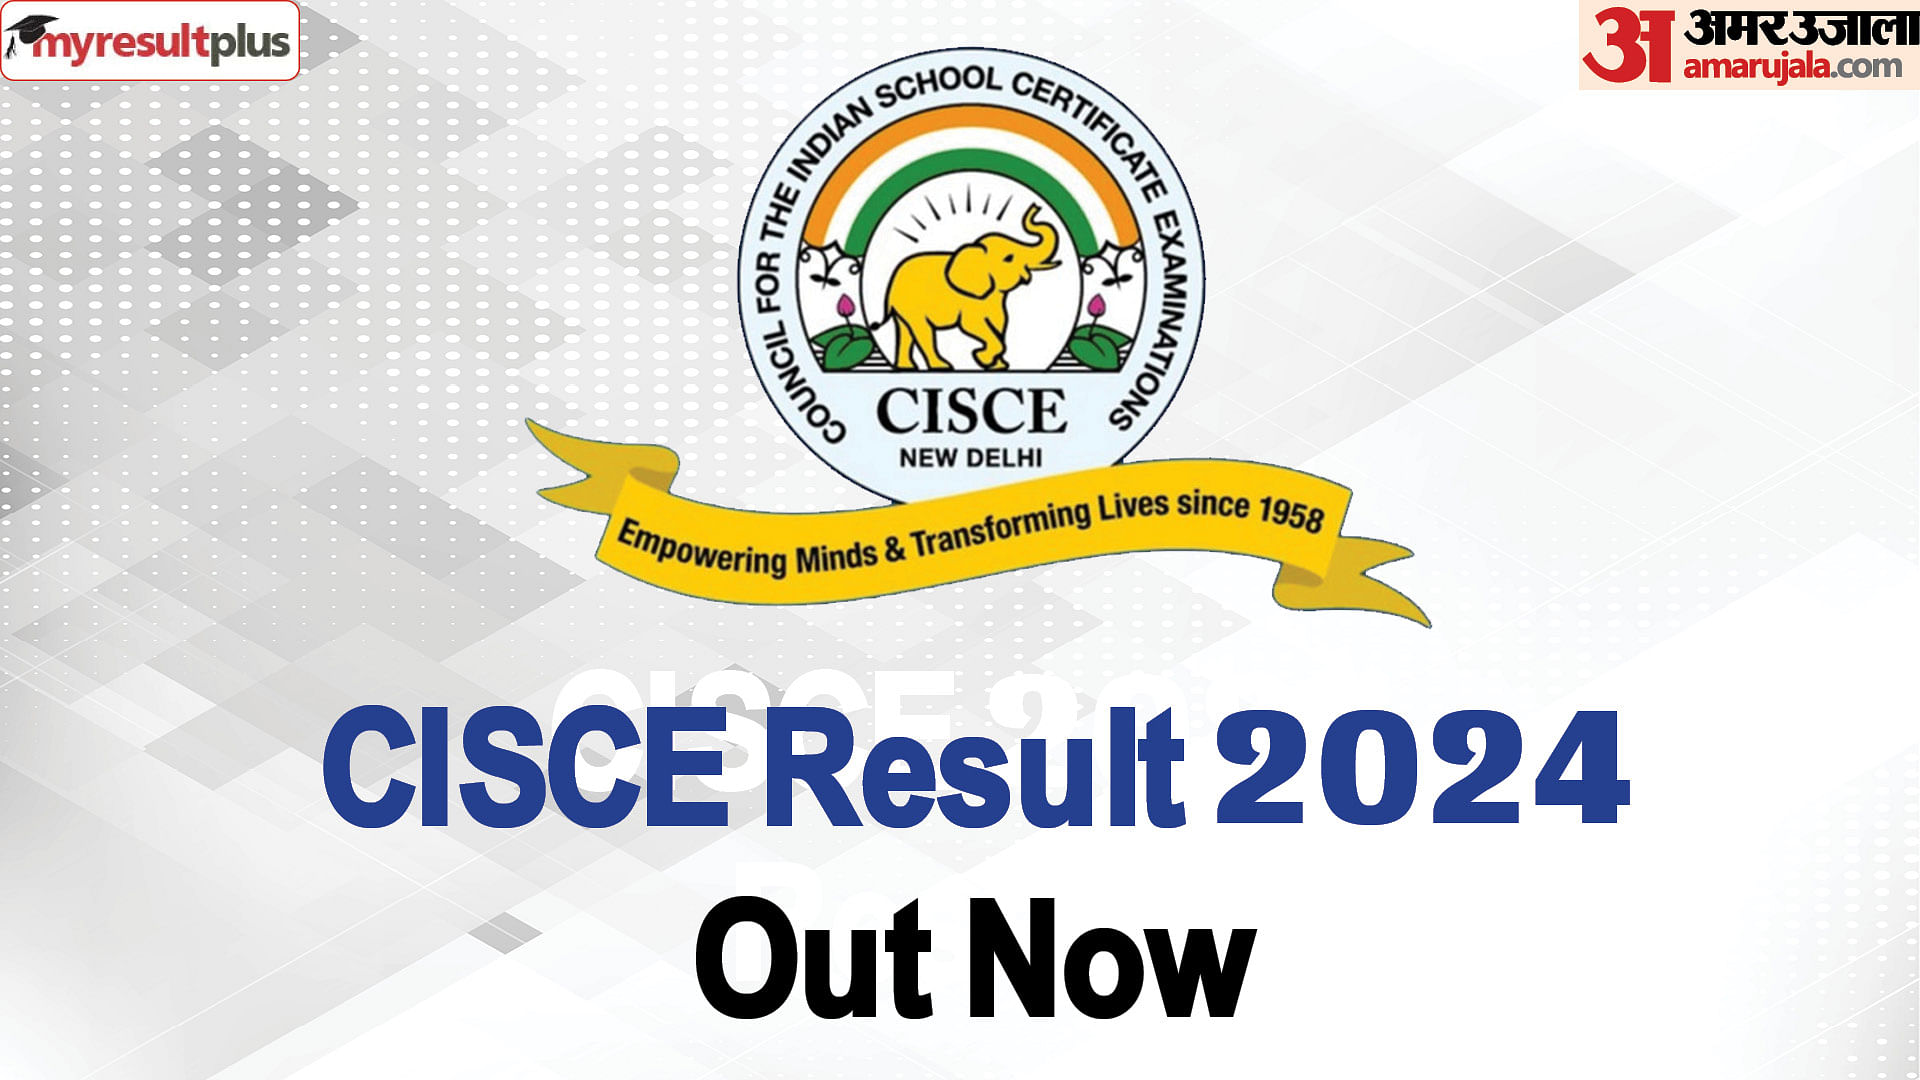 ICSE 10th, ICS 12th Results 2024 out now, Check your marksheets at cisce.org, Read here